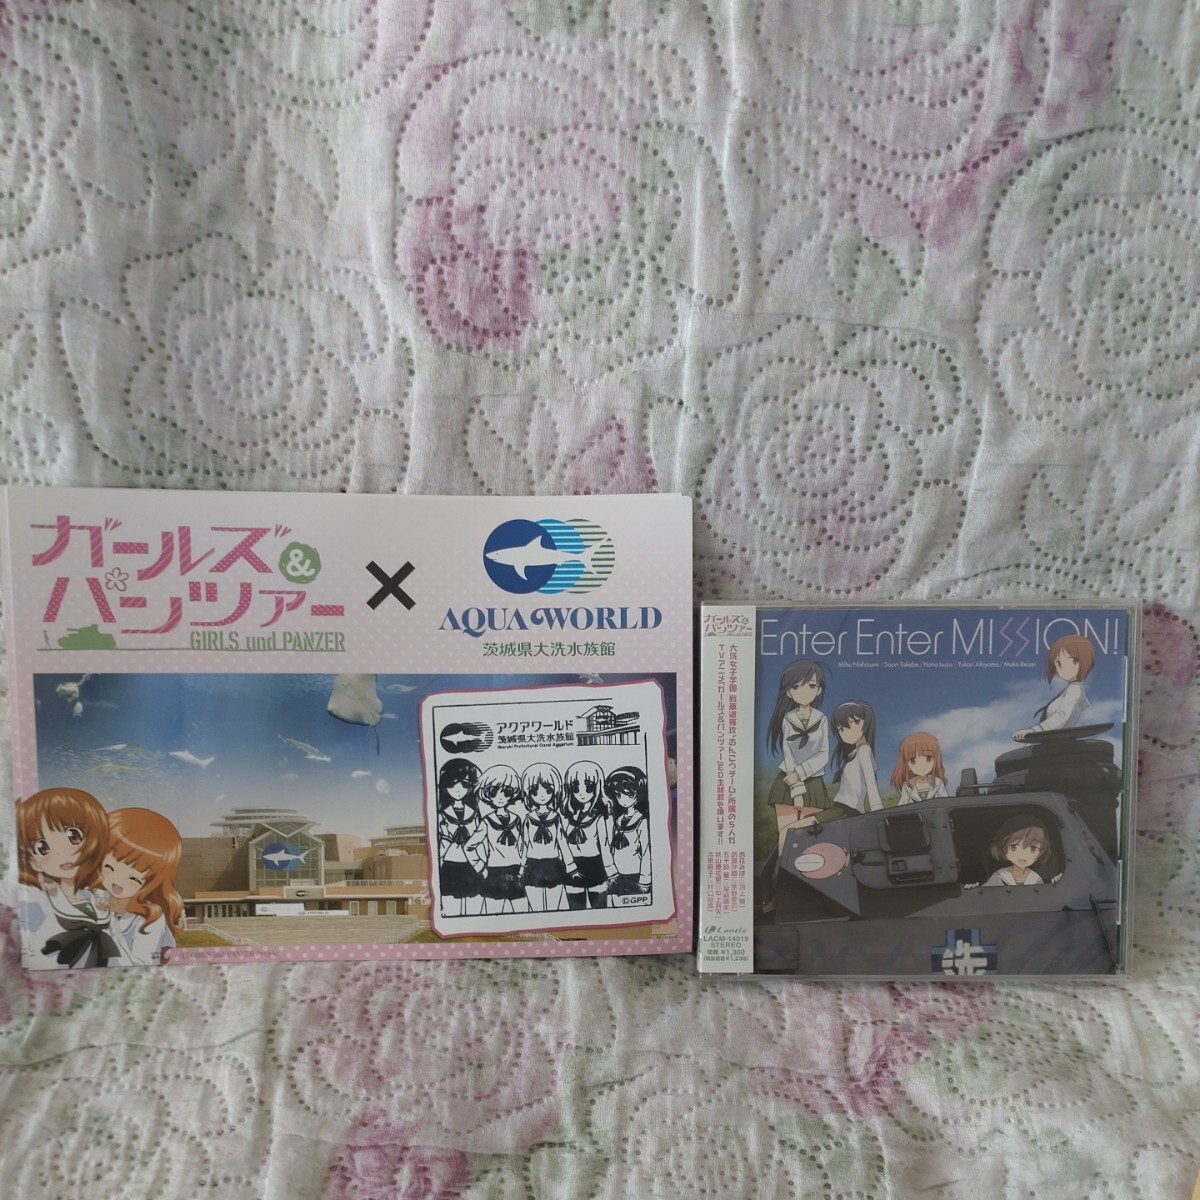  Girls&Panzer . on Mai autograph Ankoo anglerfish team certificate of residence another autograph autograph square fancy cardboard 